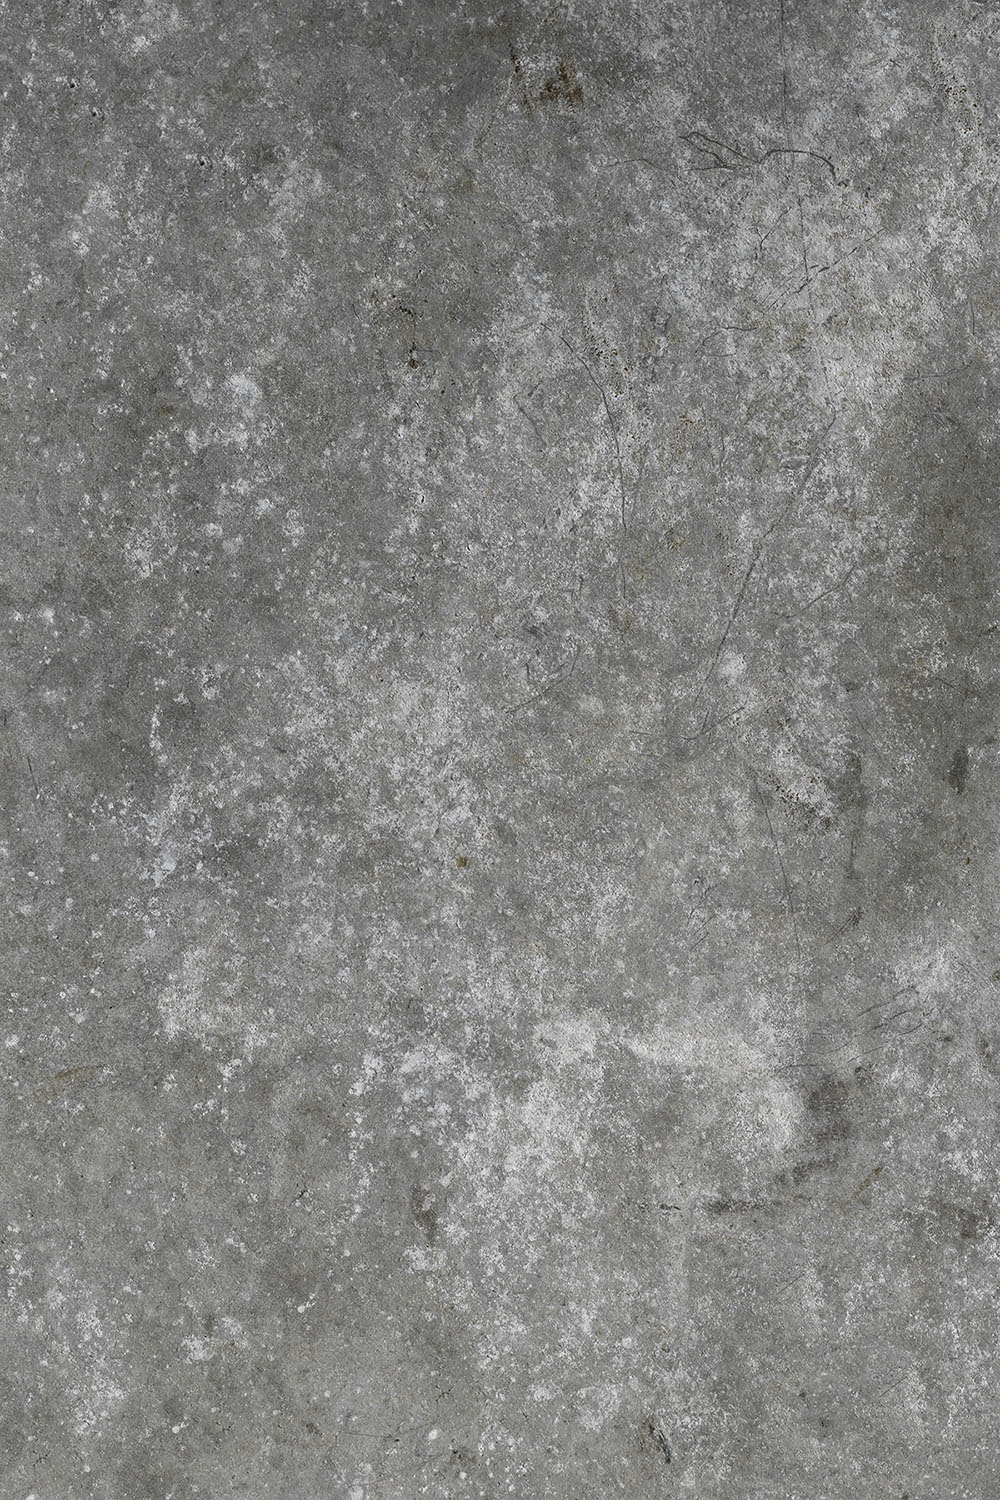 Cluttered cement vinyl backdrop is grey toned and has a lot of texture